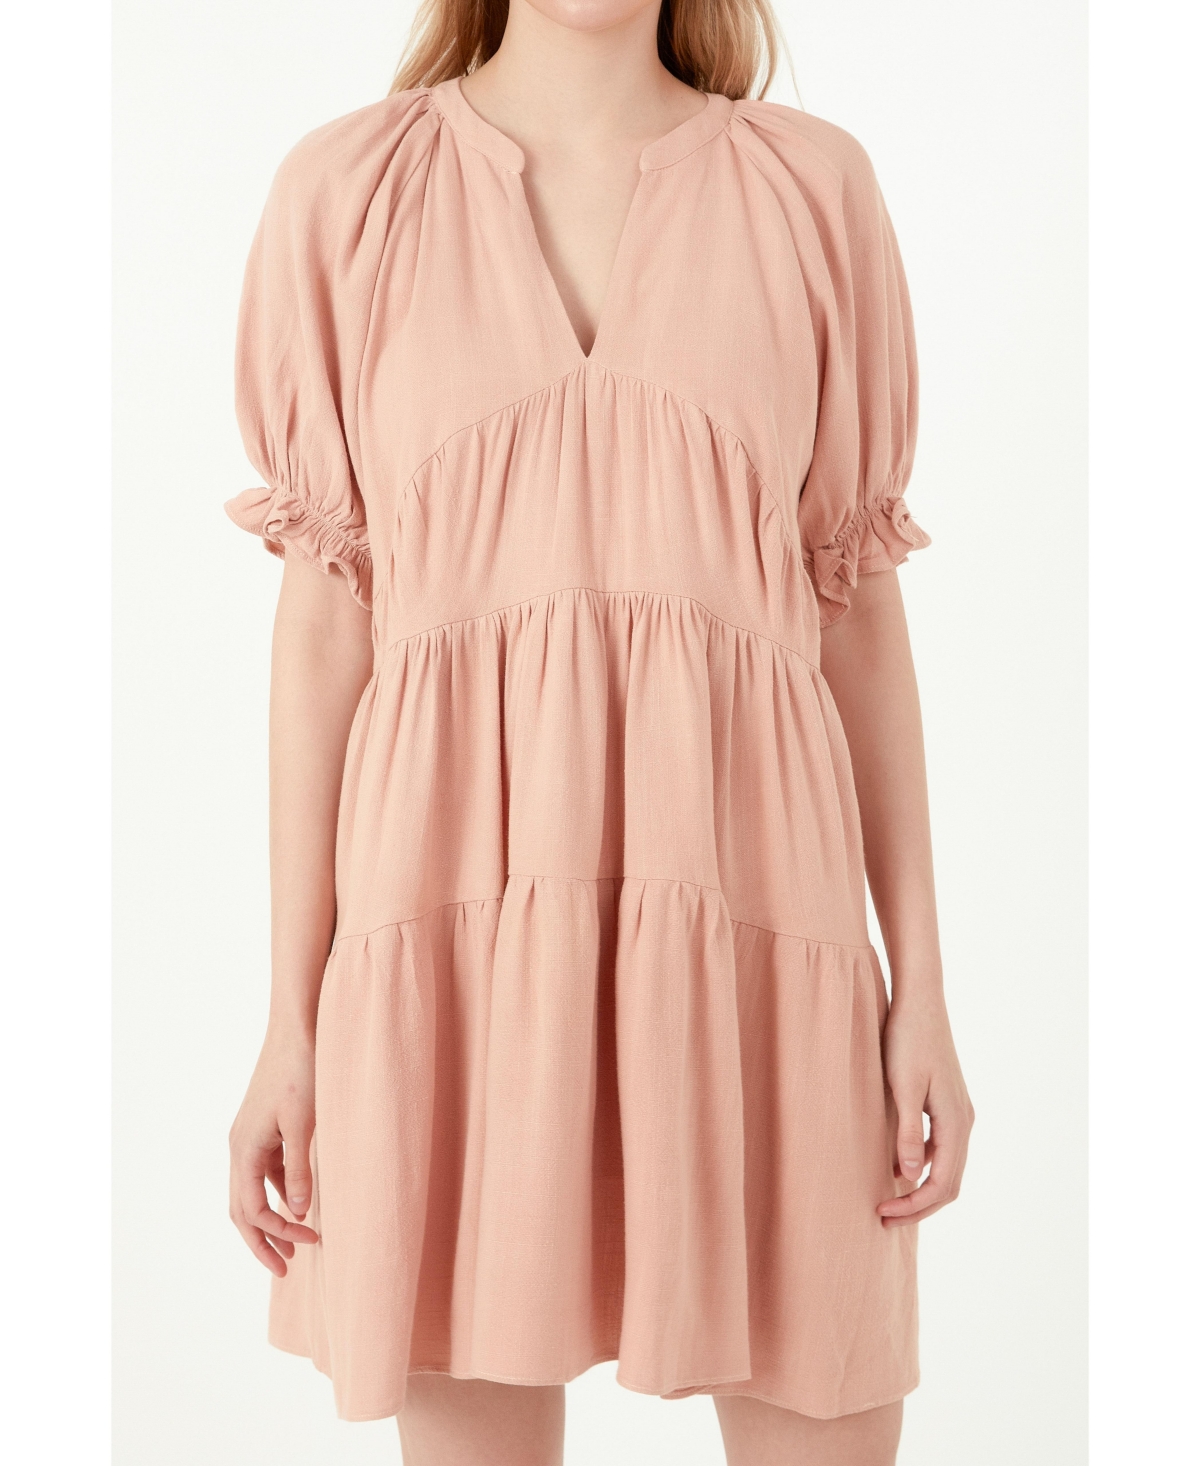 Free The Roses Women's Solid Tiered Dress With Ruffled Sleeves